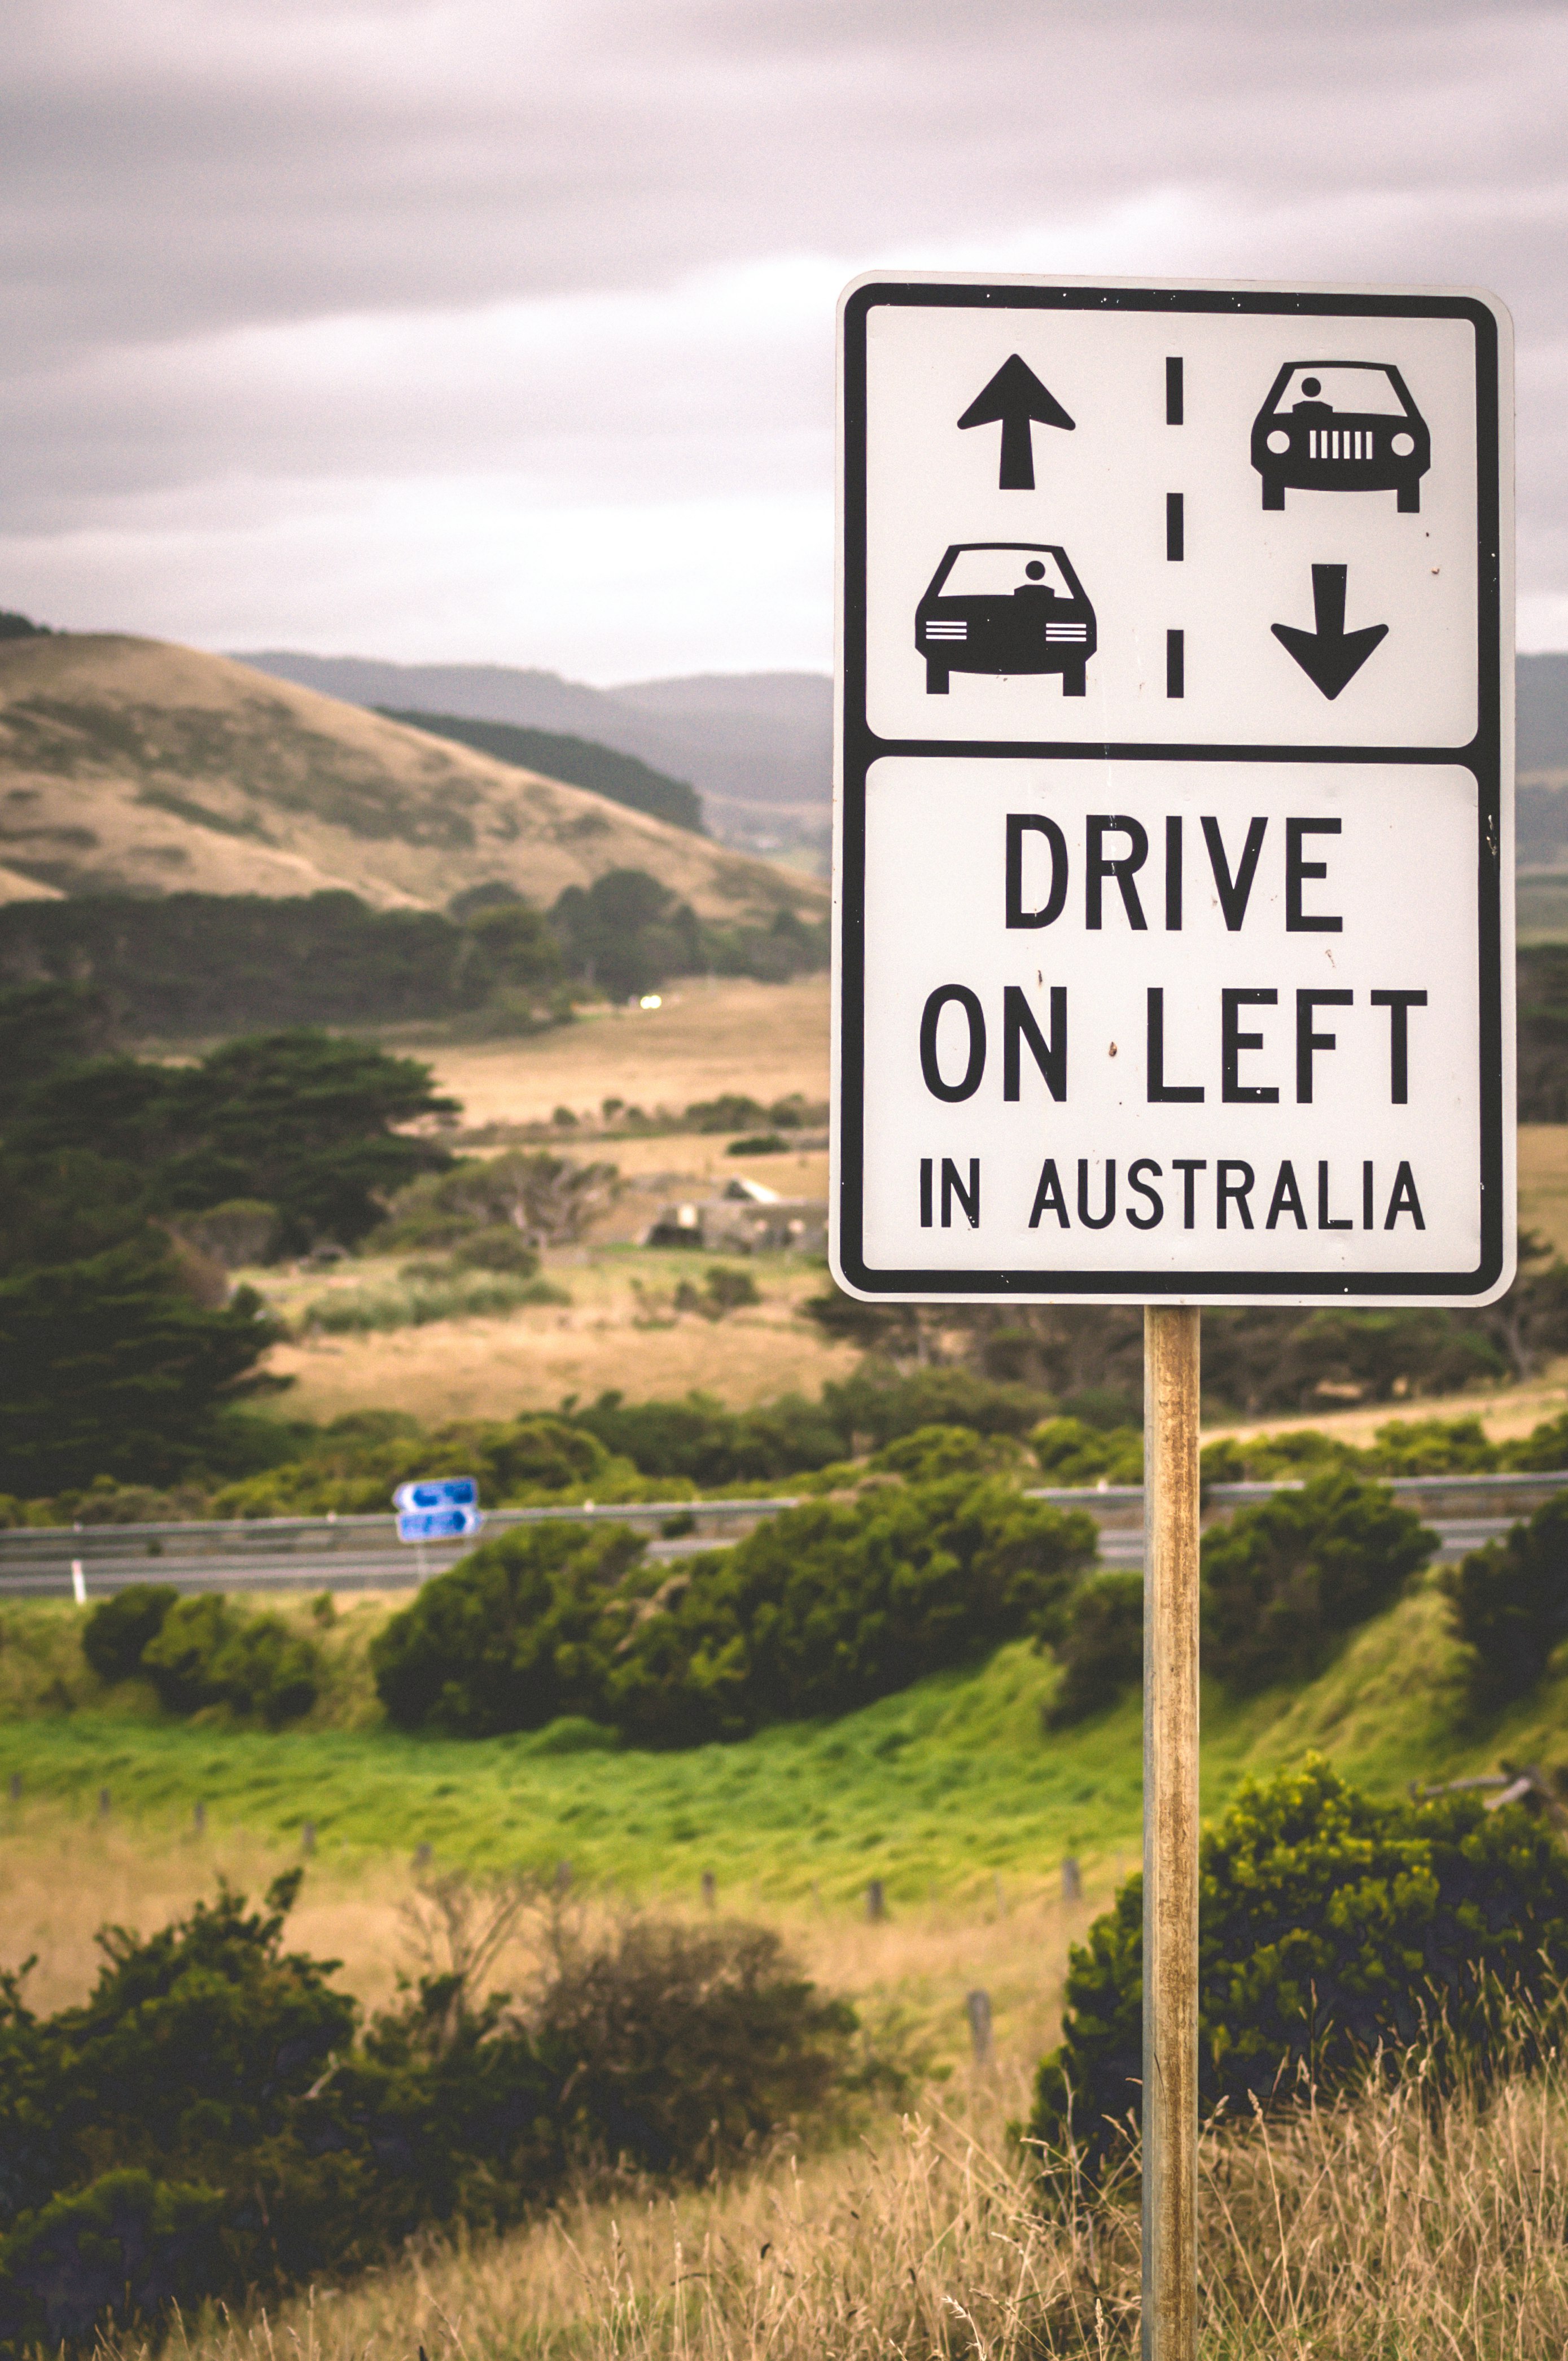 There’s many things that made Australia quite different. On that list, we have the fact to drive on left – it’s a curious experience, at least.